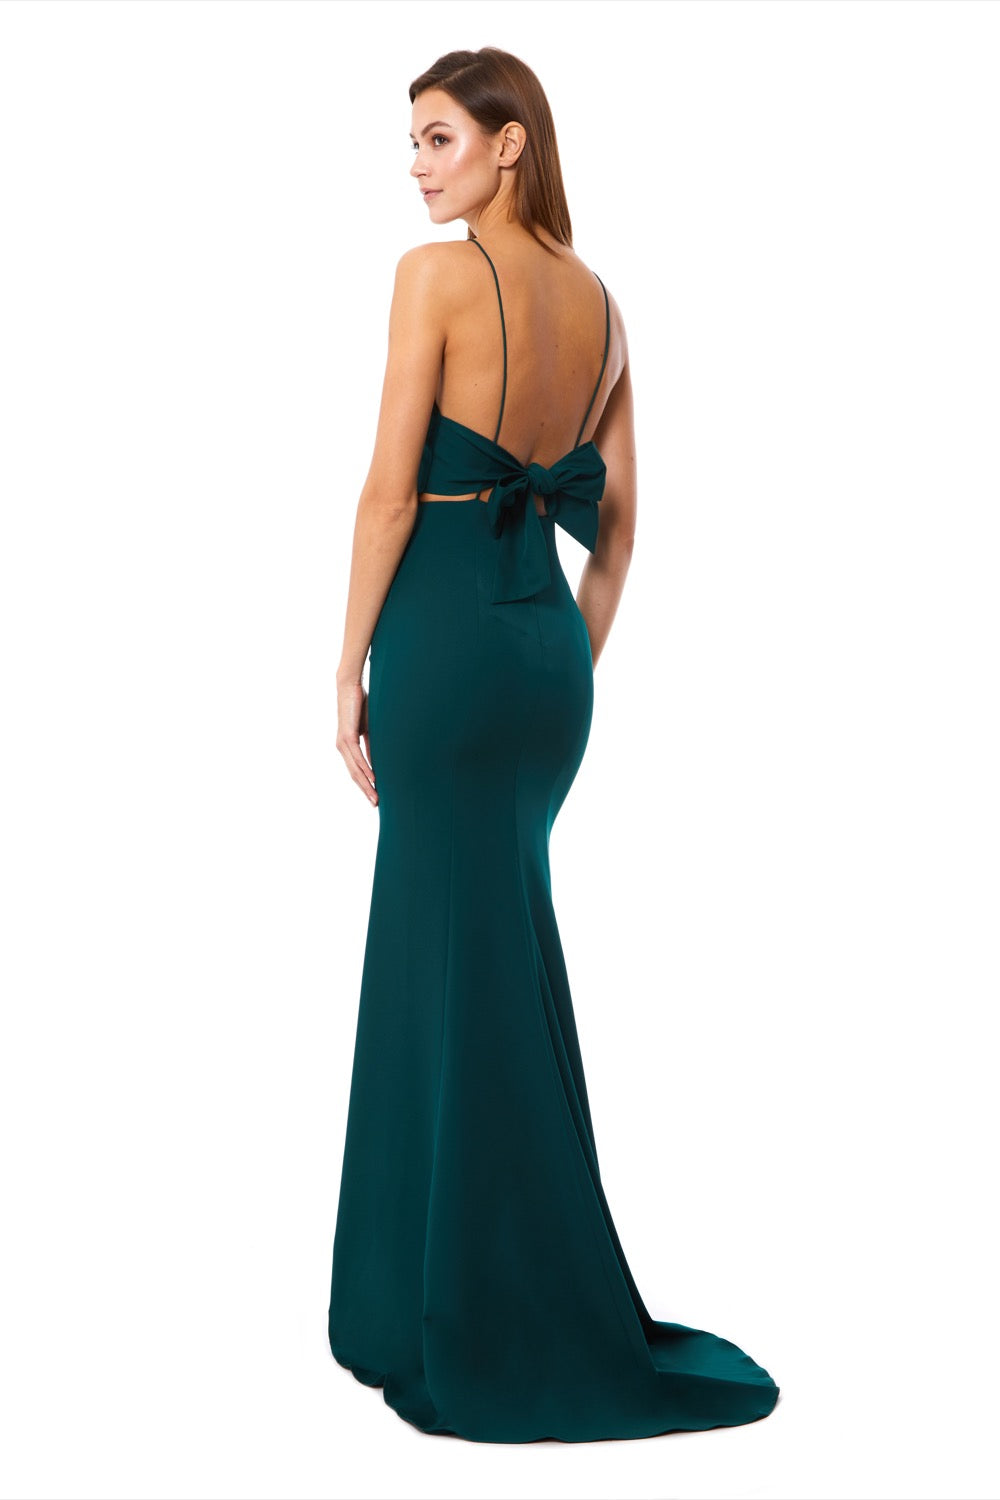 Jemima Square Neck Maxi Dress with Open Back, UK 14 / US 10 / EU 42 / Forest Green